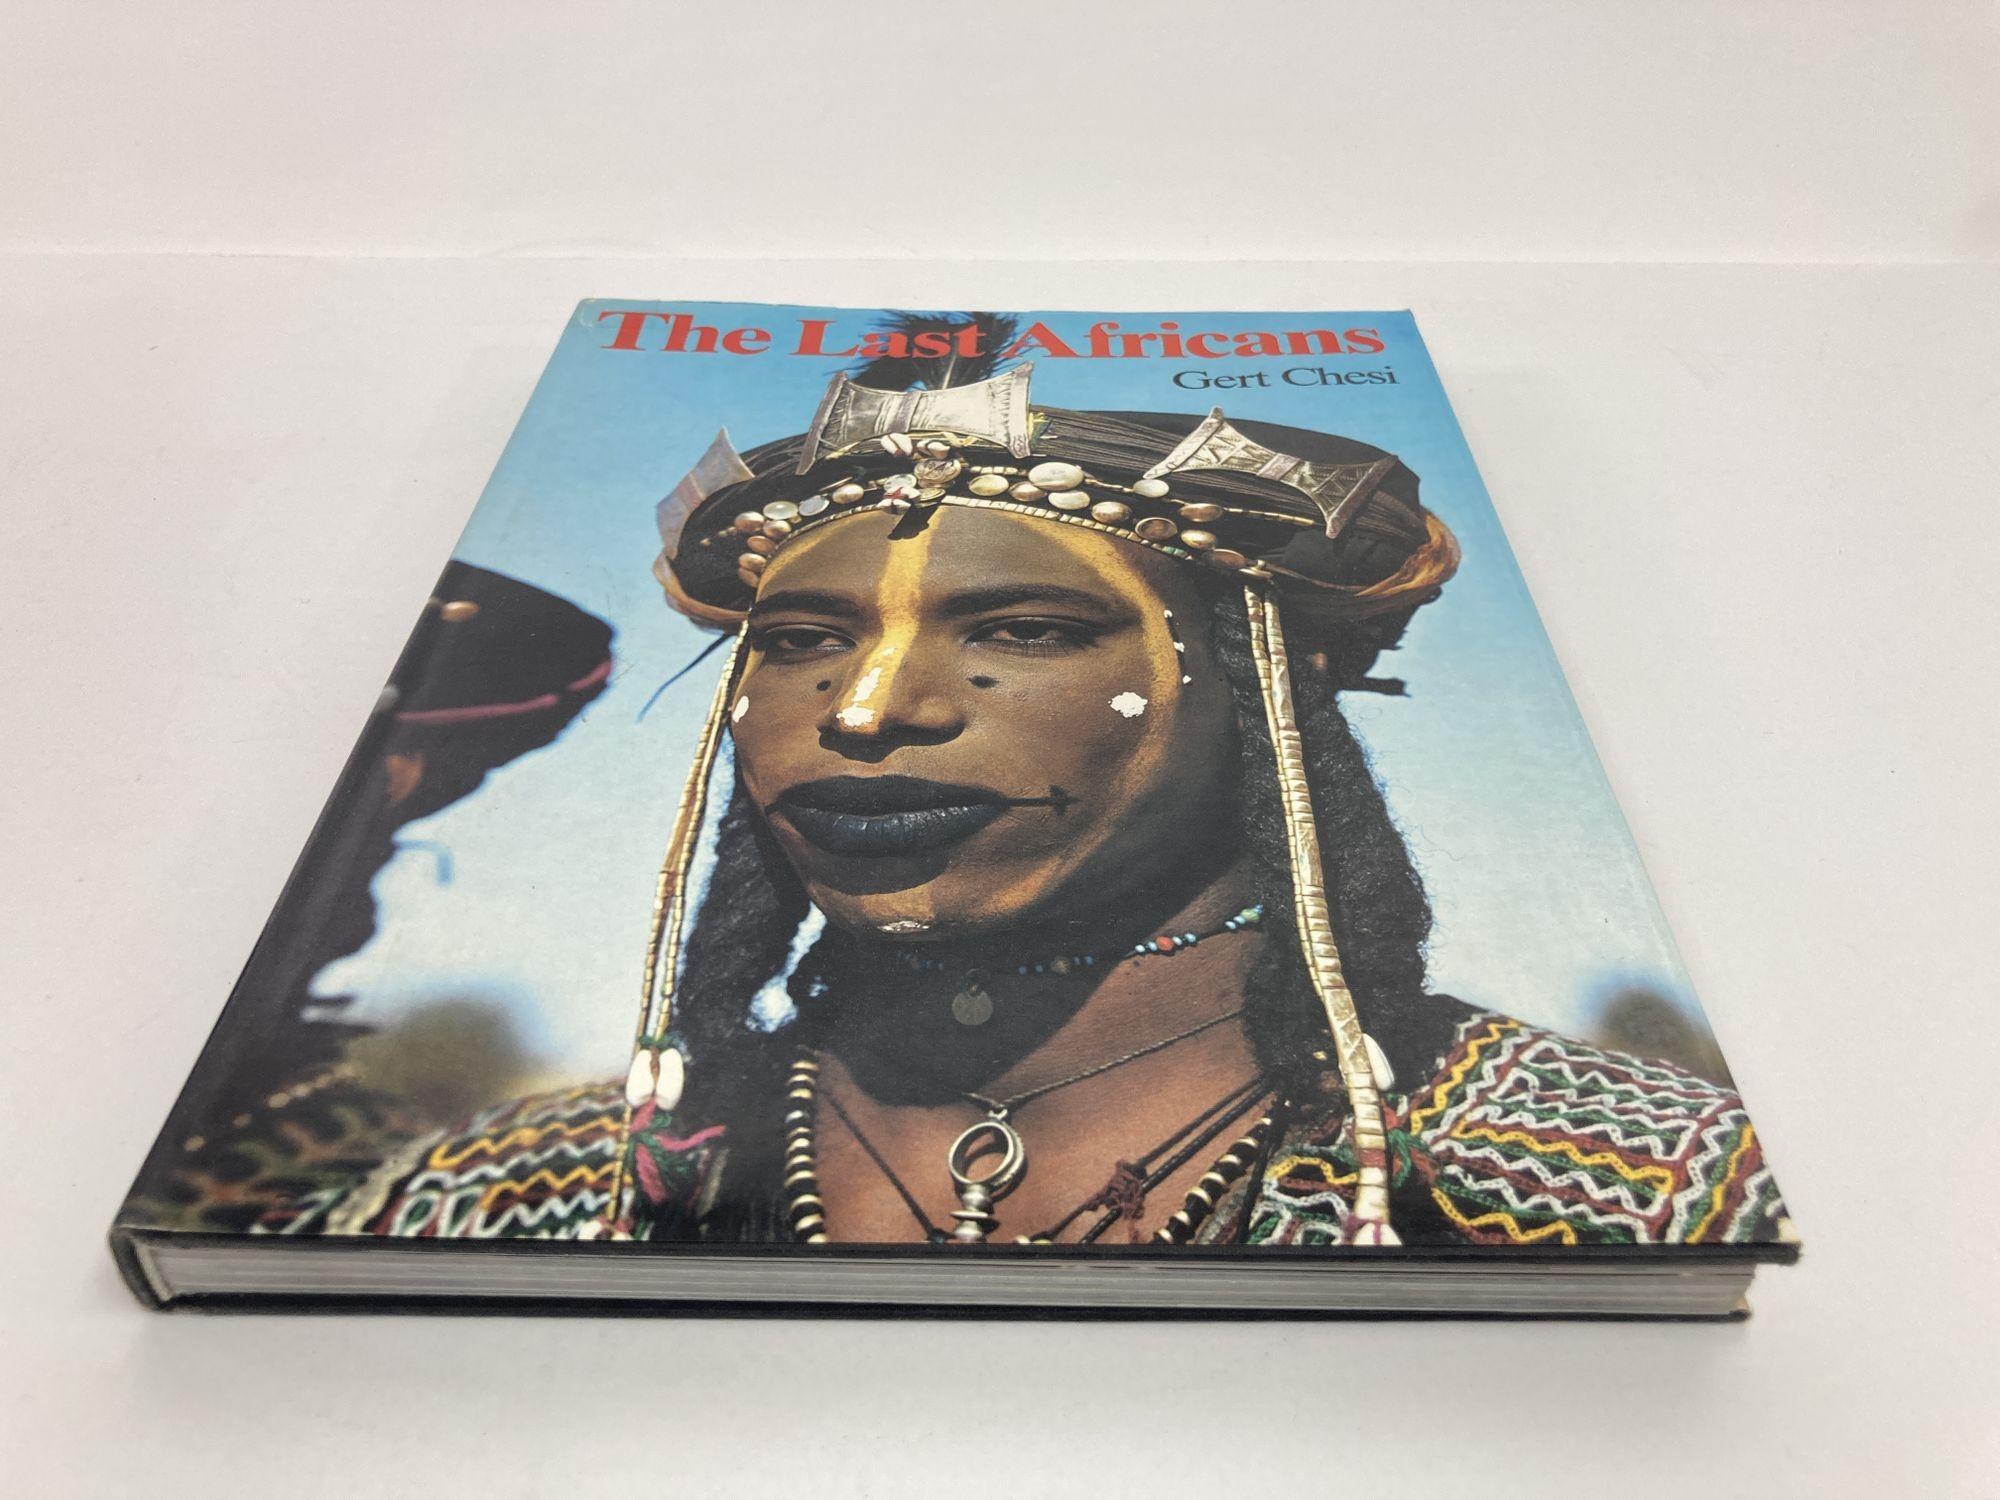 Tribal The Last Africans by Gert Chesi Hardcover Book 1981 For Sale